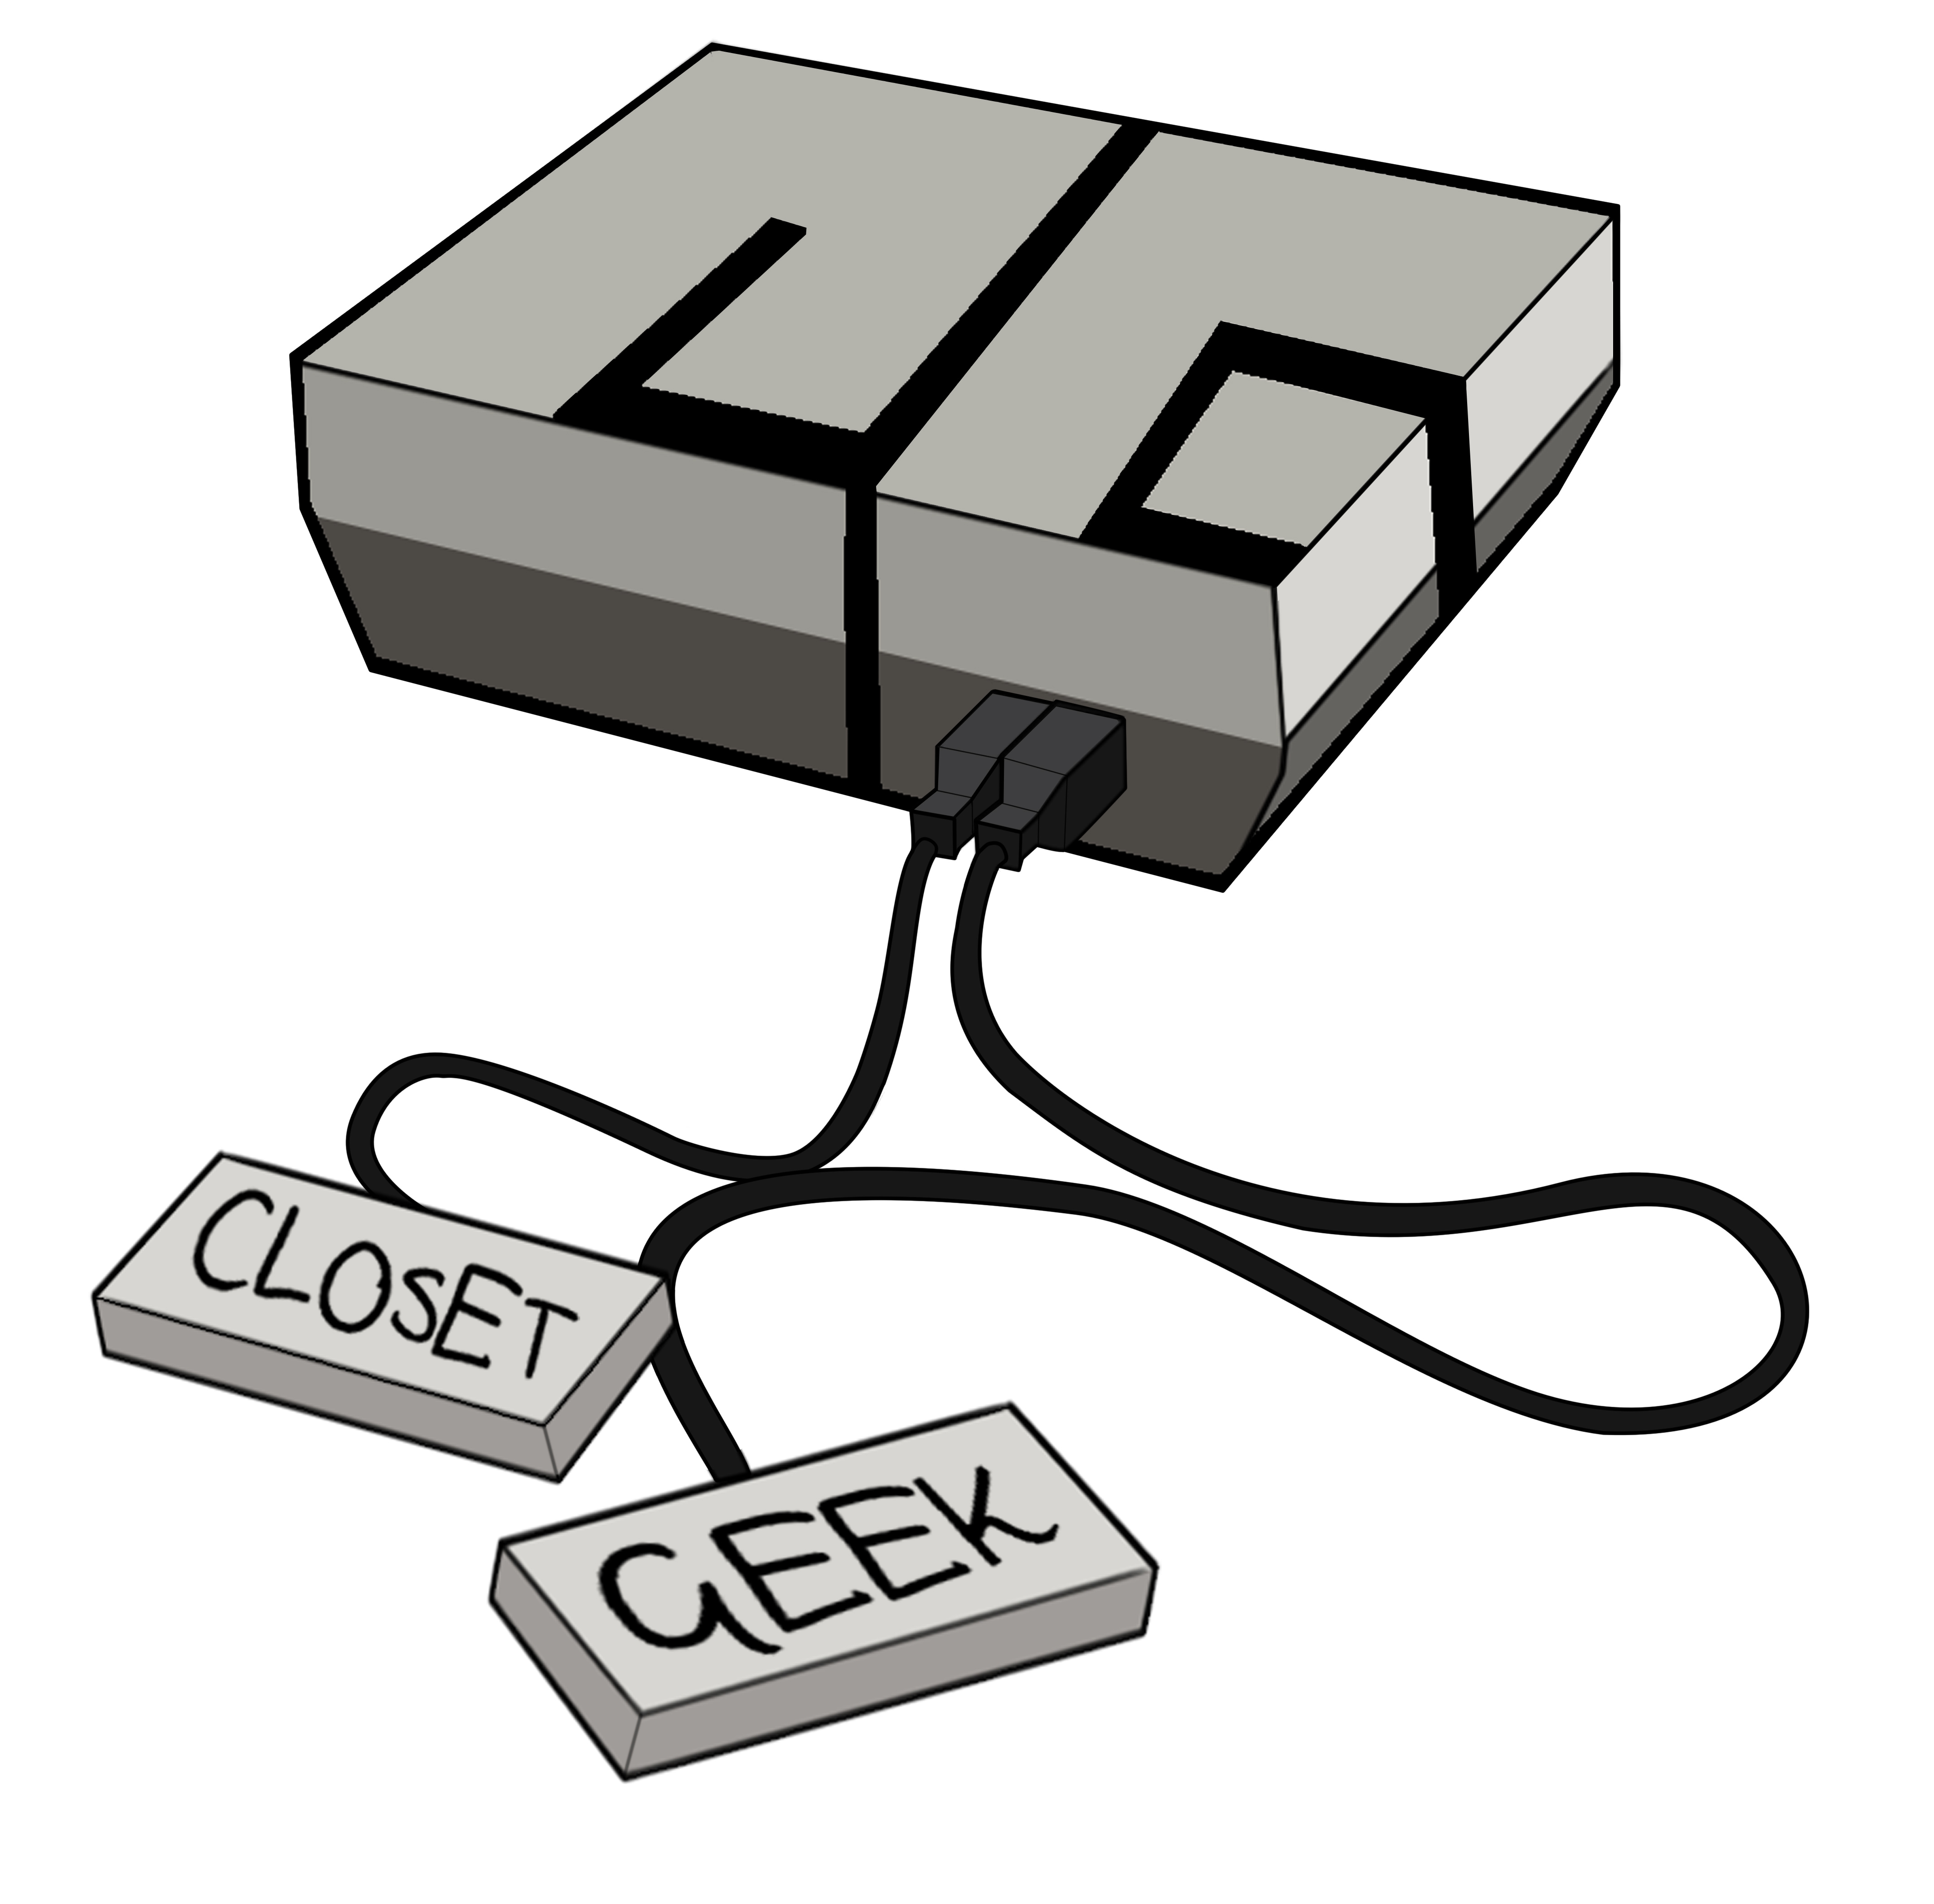 The Closet Geek 113: Dead or Alive?